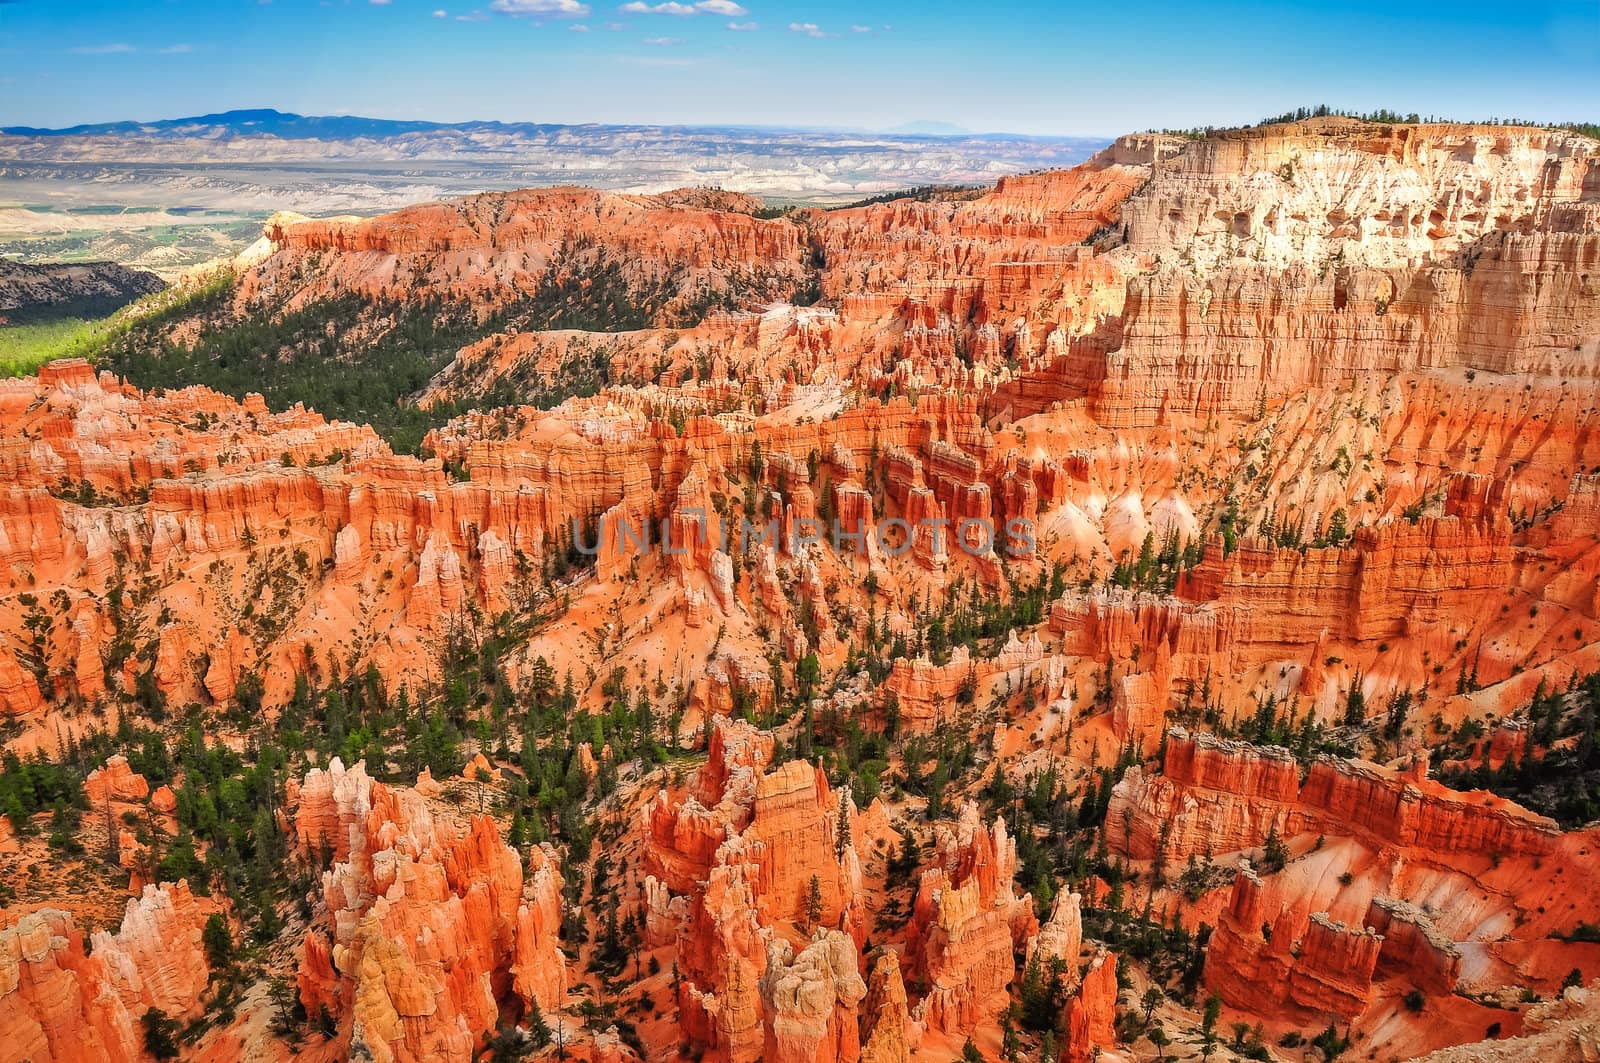 Bryce canyon national park landscape view by martinm303